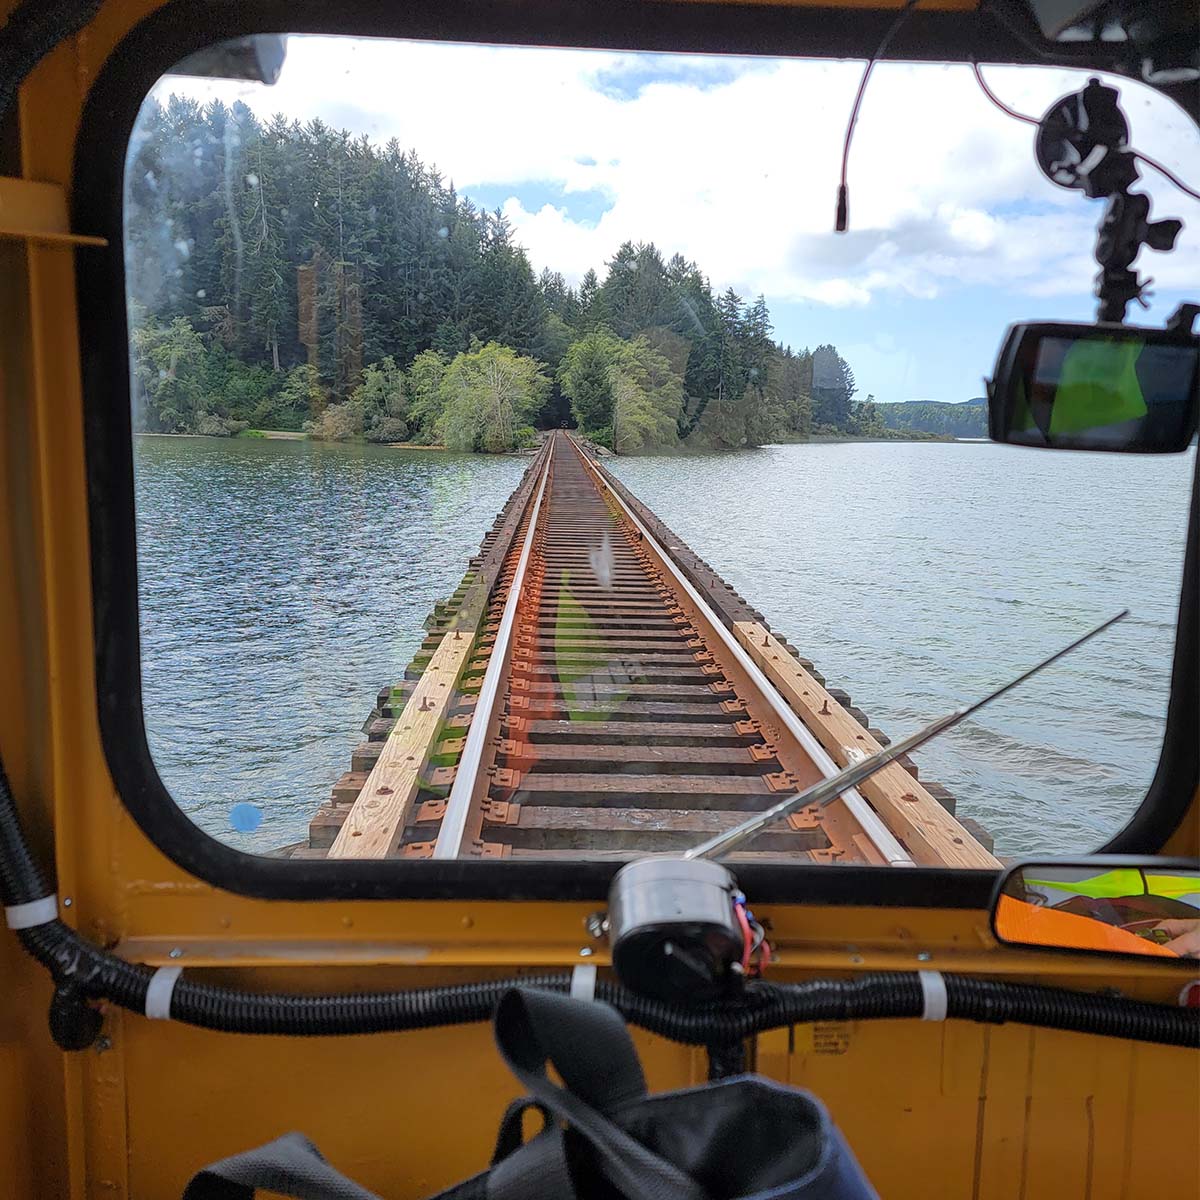 Looking out of the front of Grigg’s railroad car on a bridge over a body of water, into a tunnel heading through densely forested area.